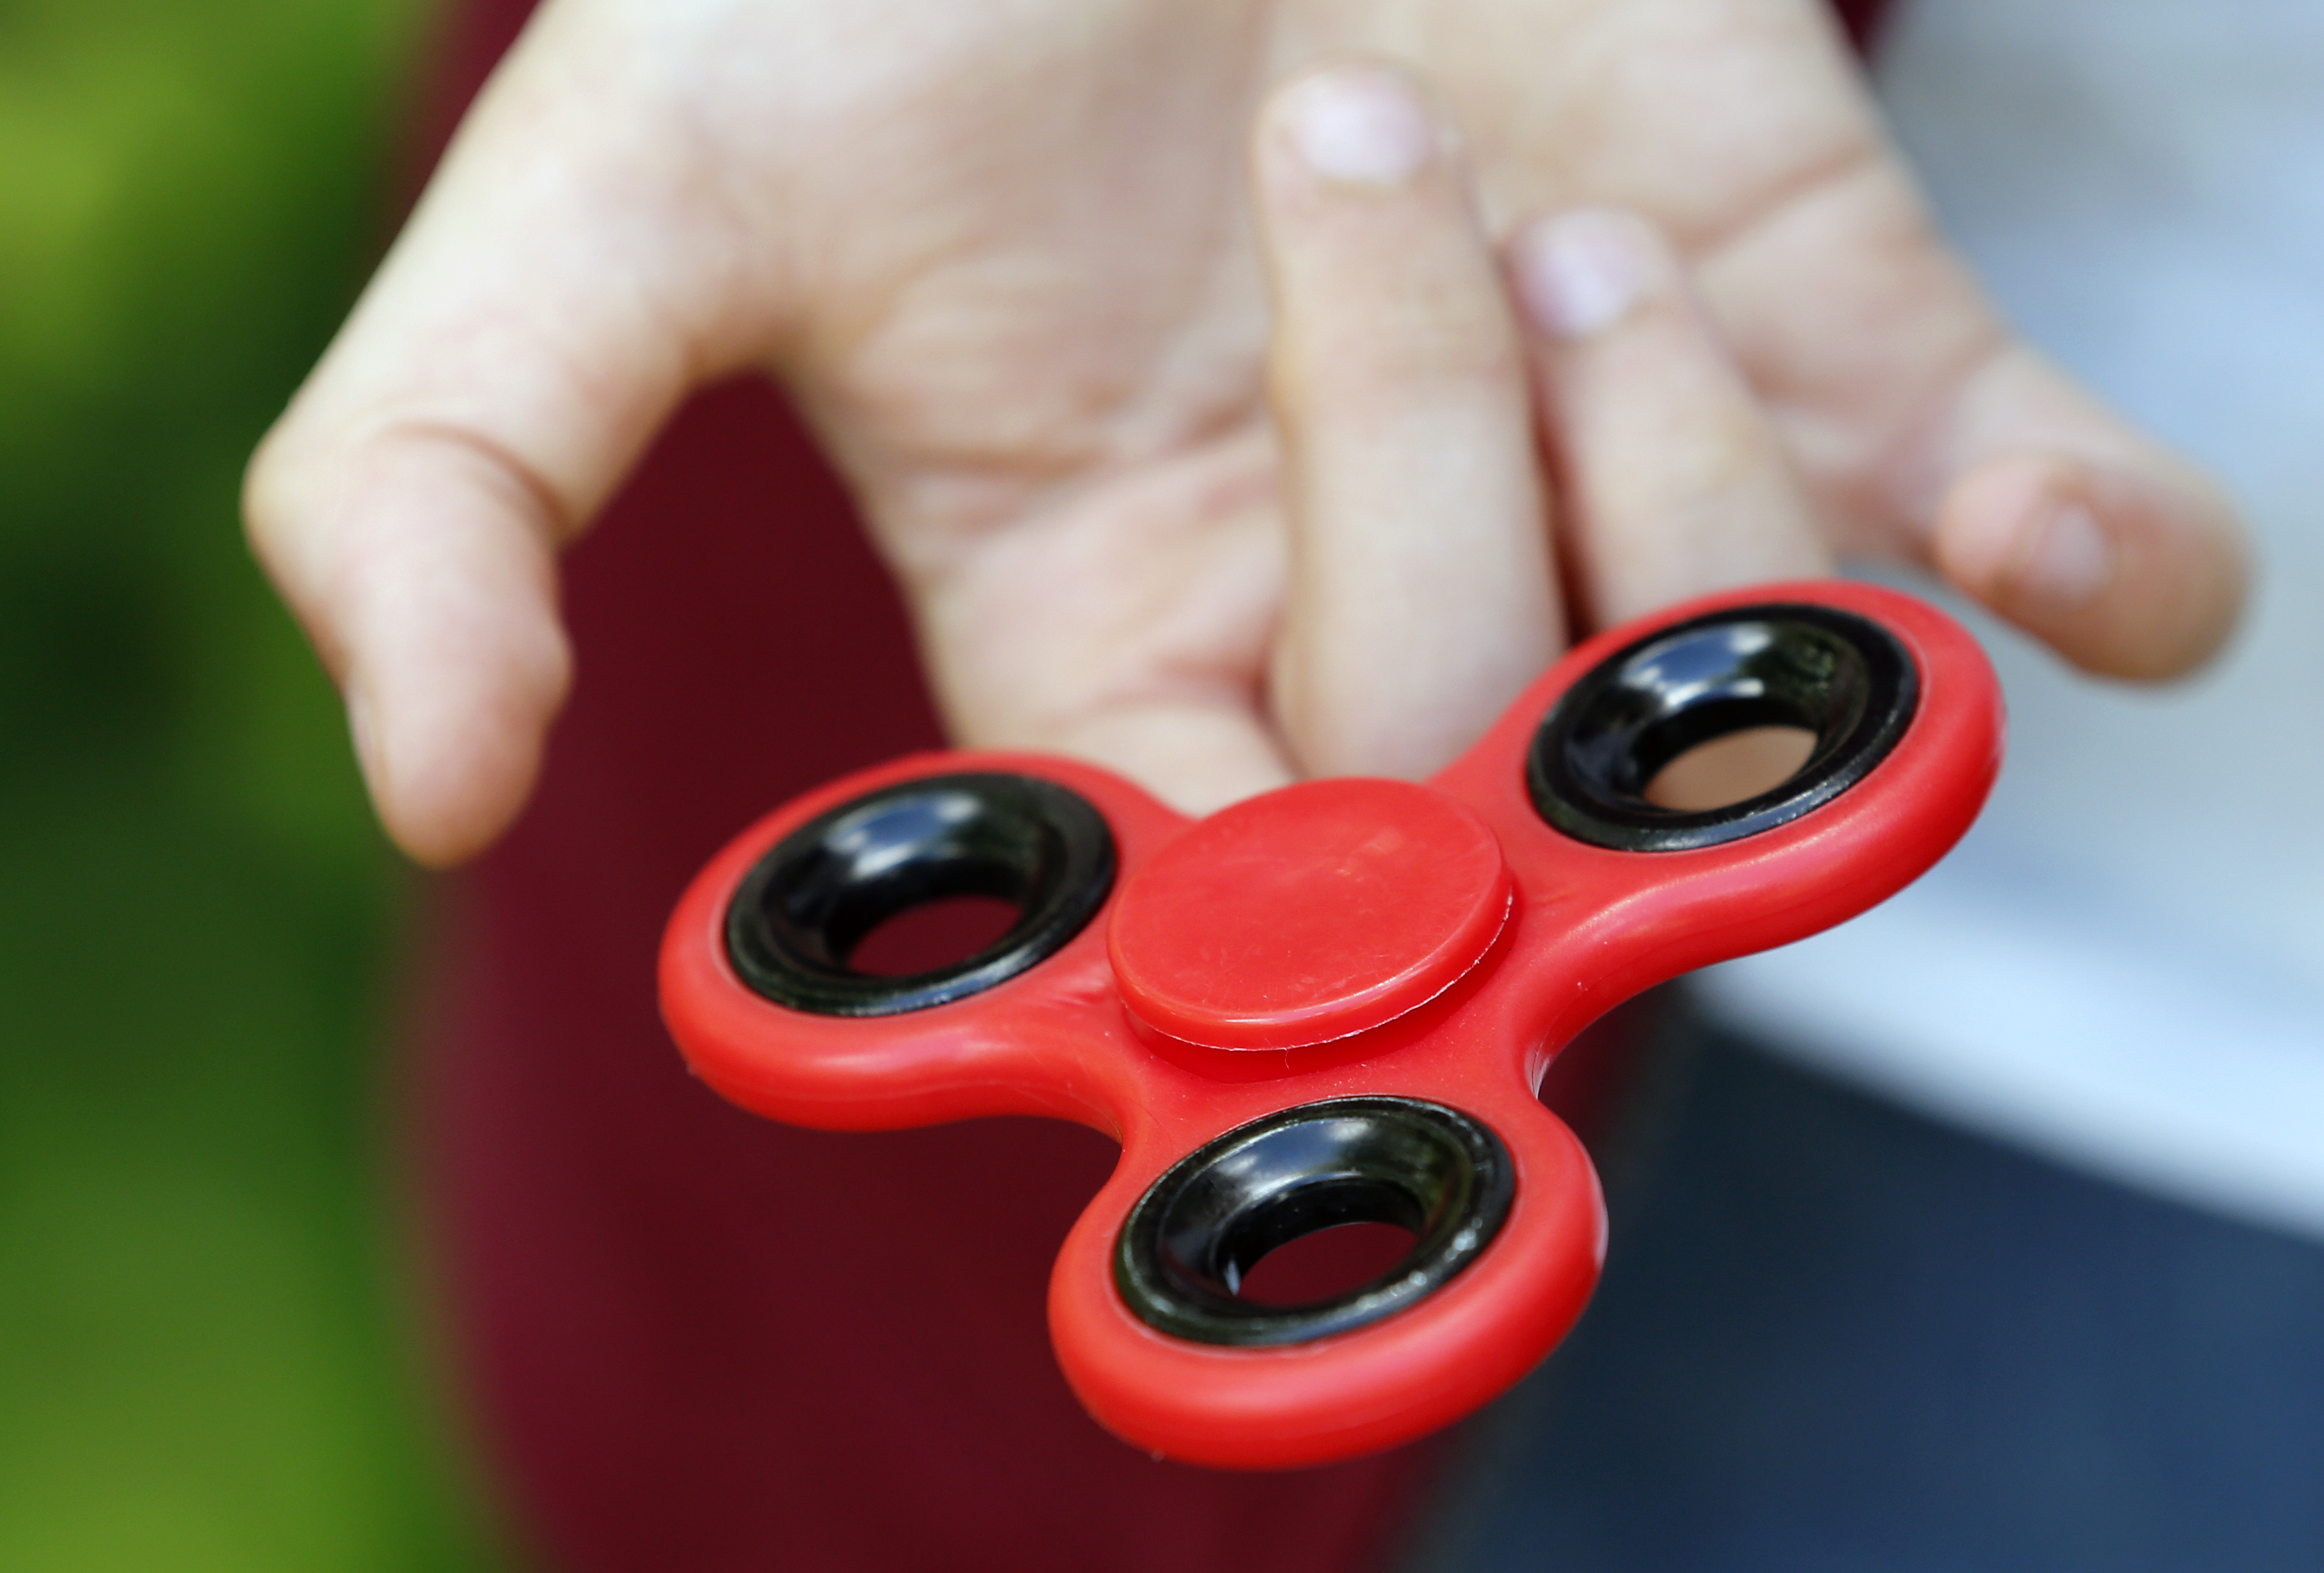 Your Fidget Spinner Could Burst Into Flames